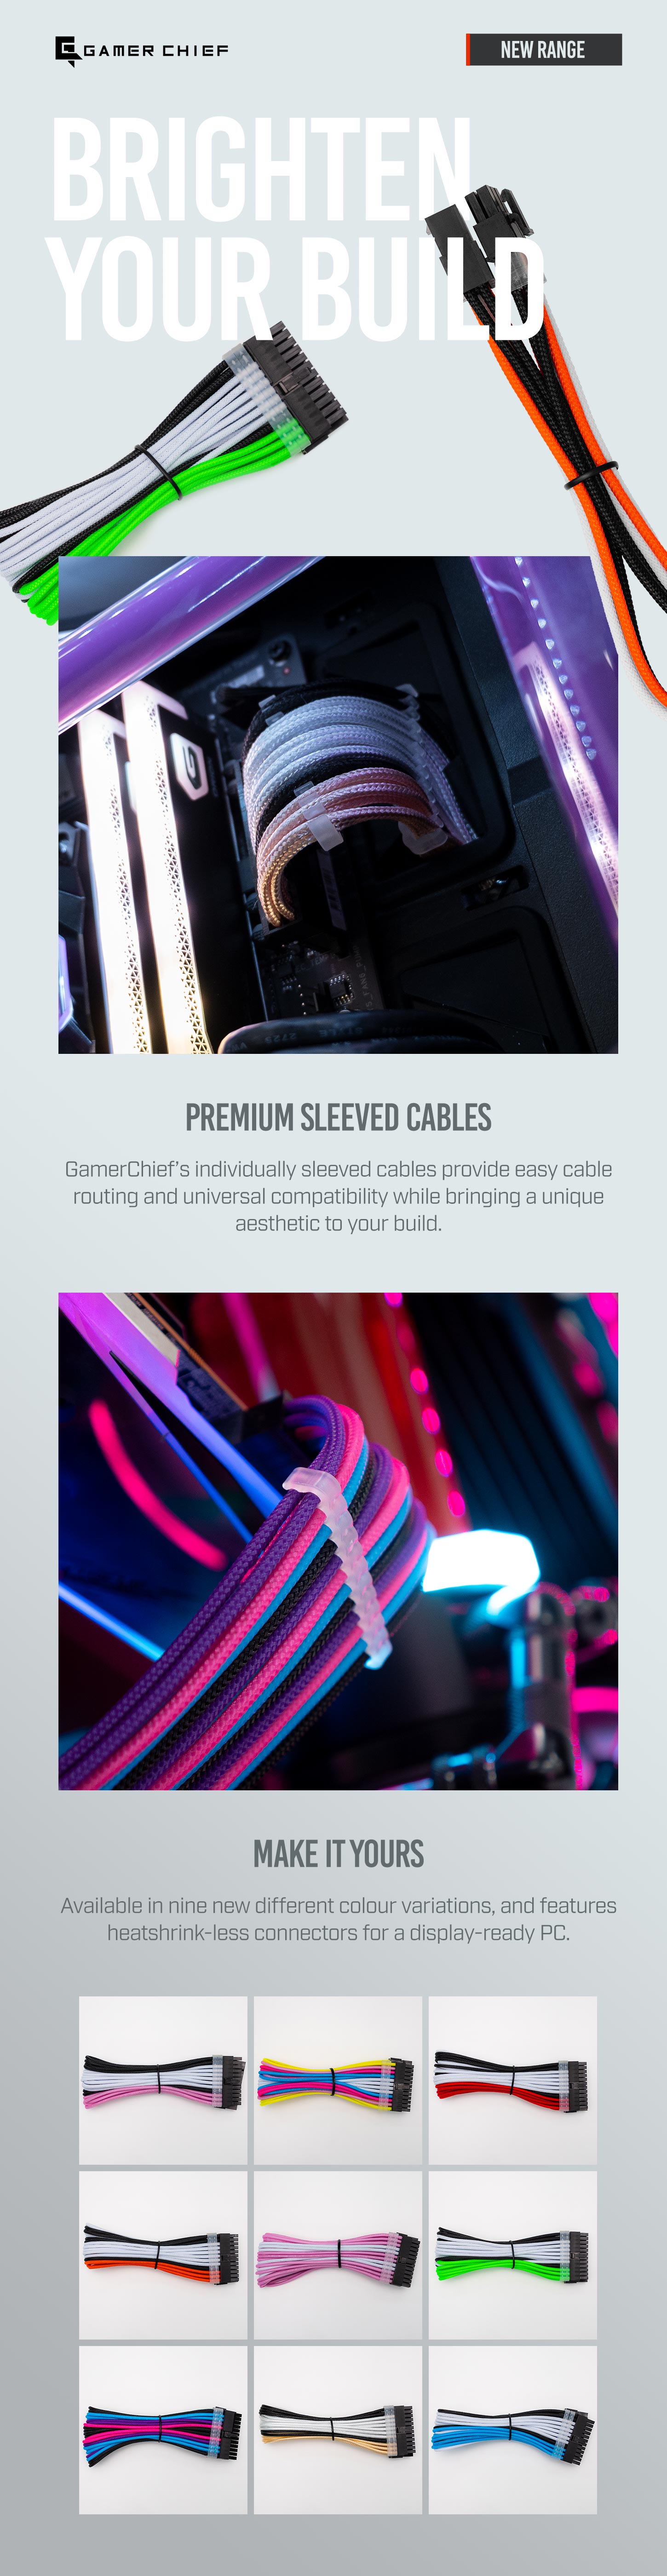 A large marketing image providing additional information about the product GamerChief Elite Series 8-Pin EPS 30cm Sleeved Extension Cable (Orange/White/Black) - Additional alt info not provided